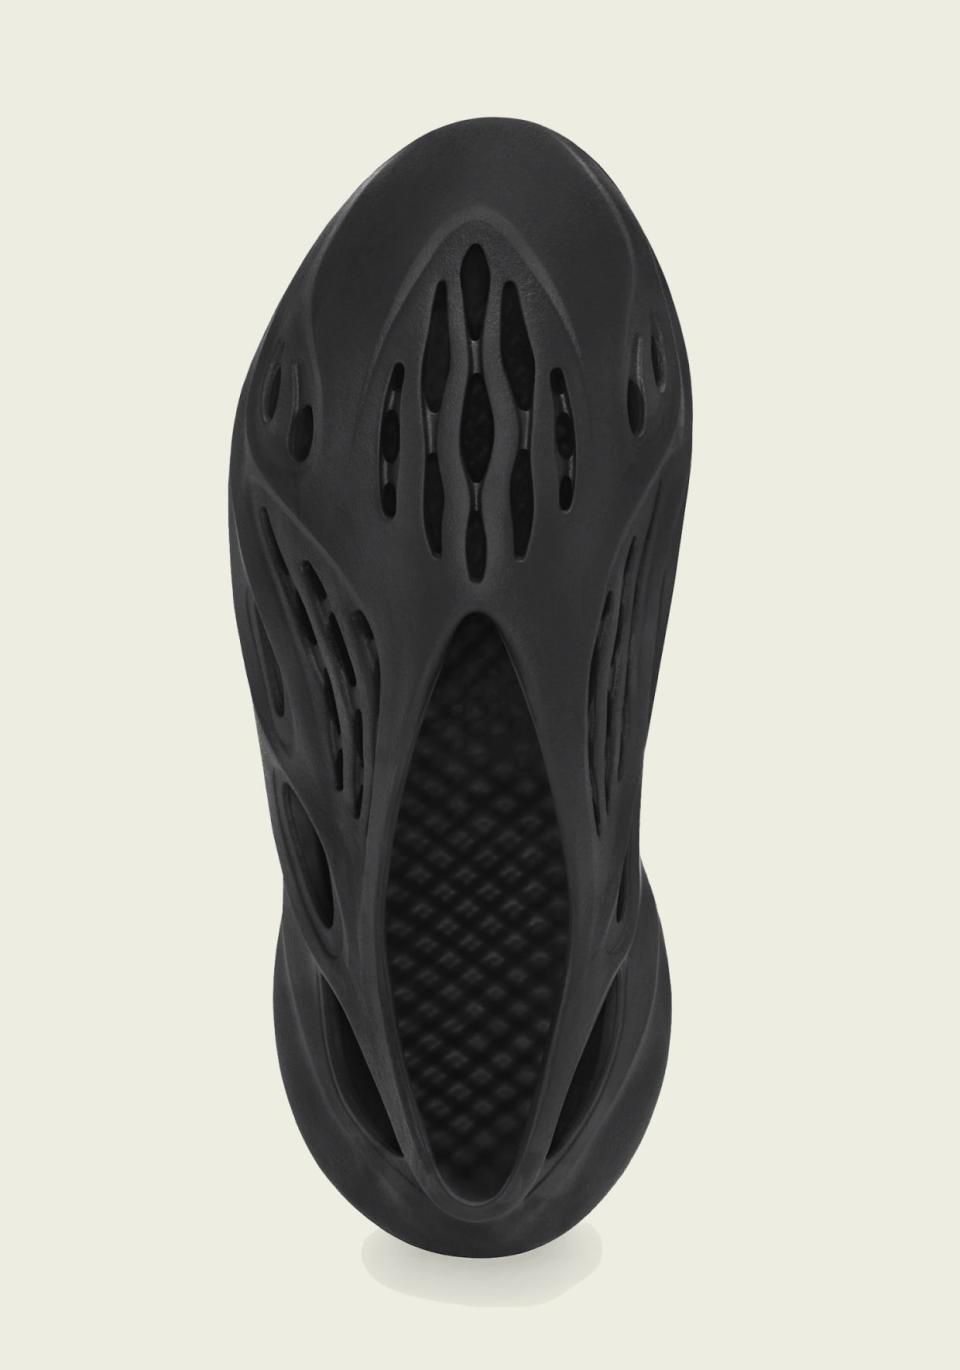 A top-down view of the Adidas Yeezy Foam Runner “Onyx.” - Credit: Courtesy of Adidas